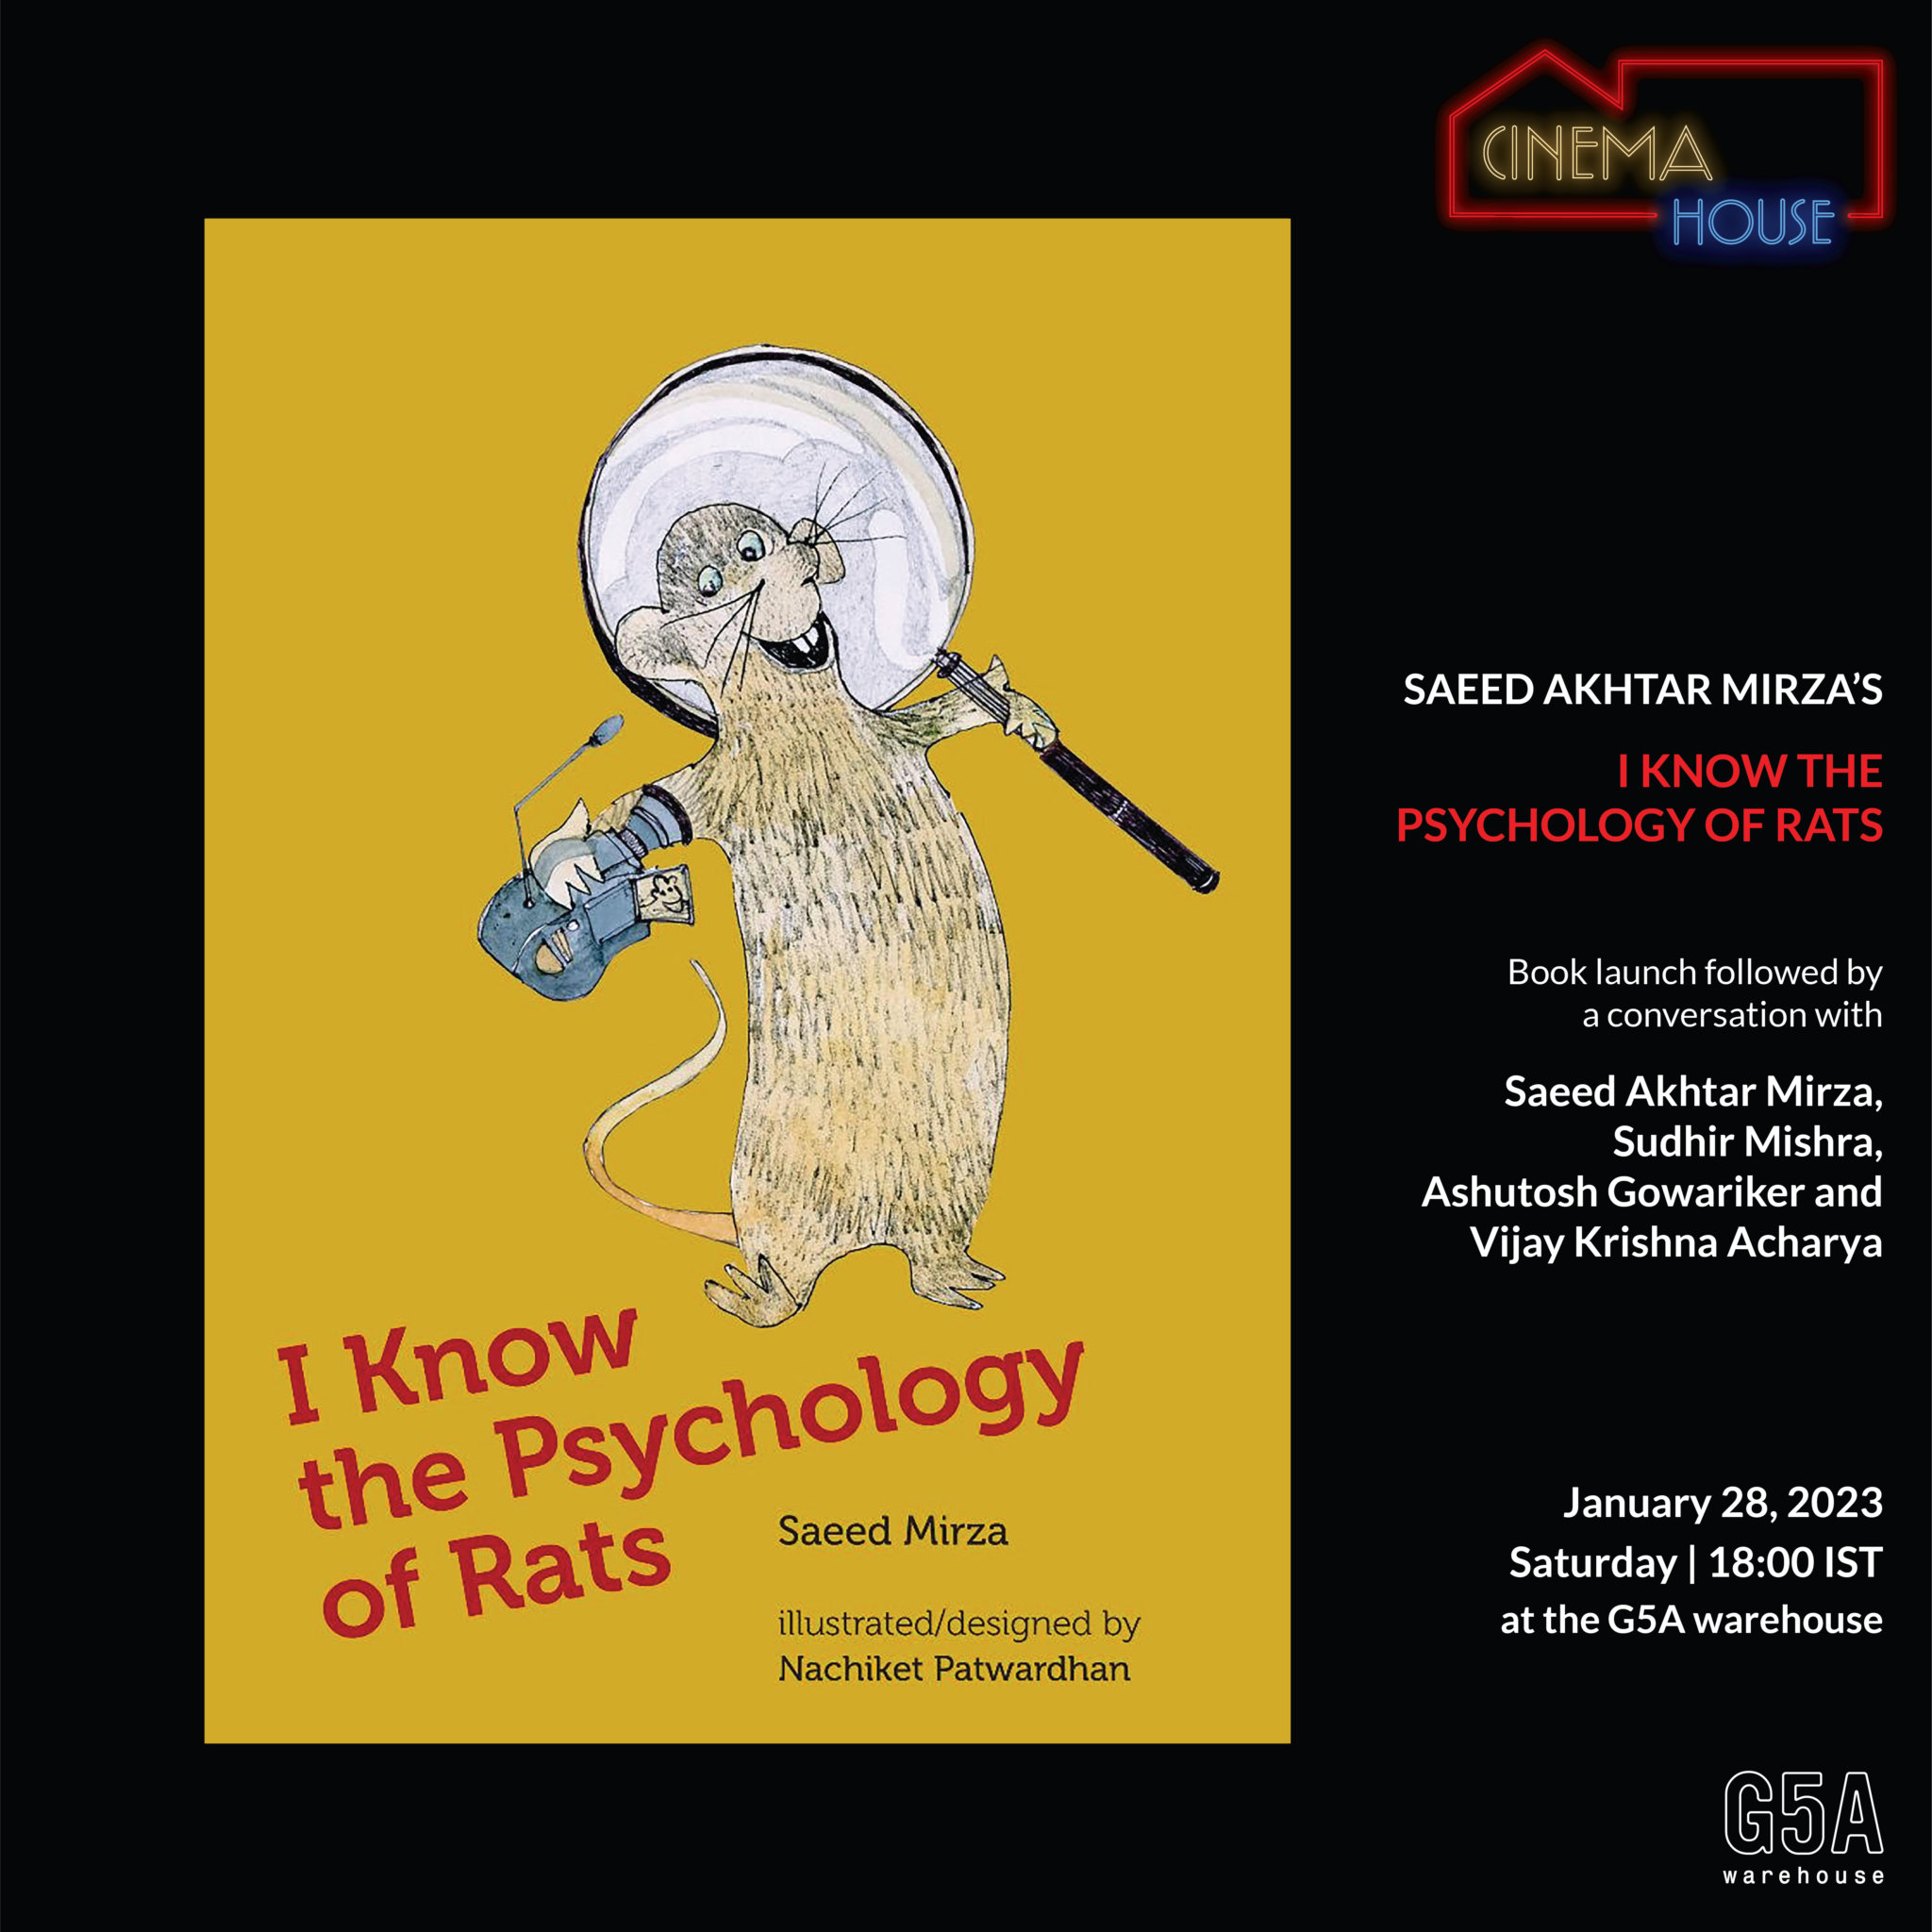 Book Launch of Saeed Akhtar Mirza’s new book I KNOW THE PSYCHOLOGY OF RATS Reading